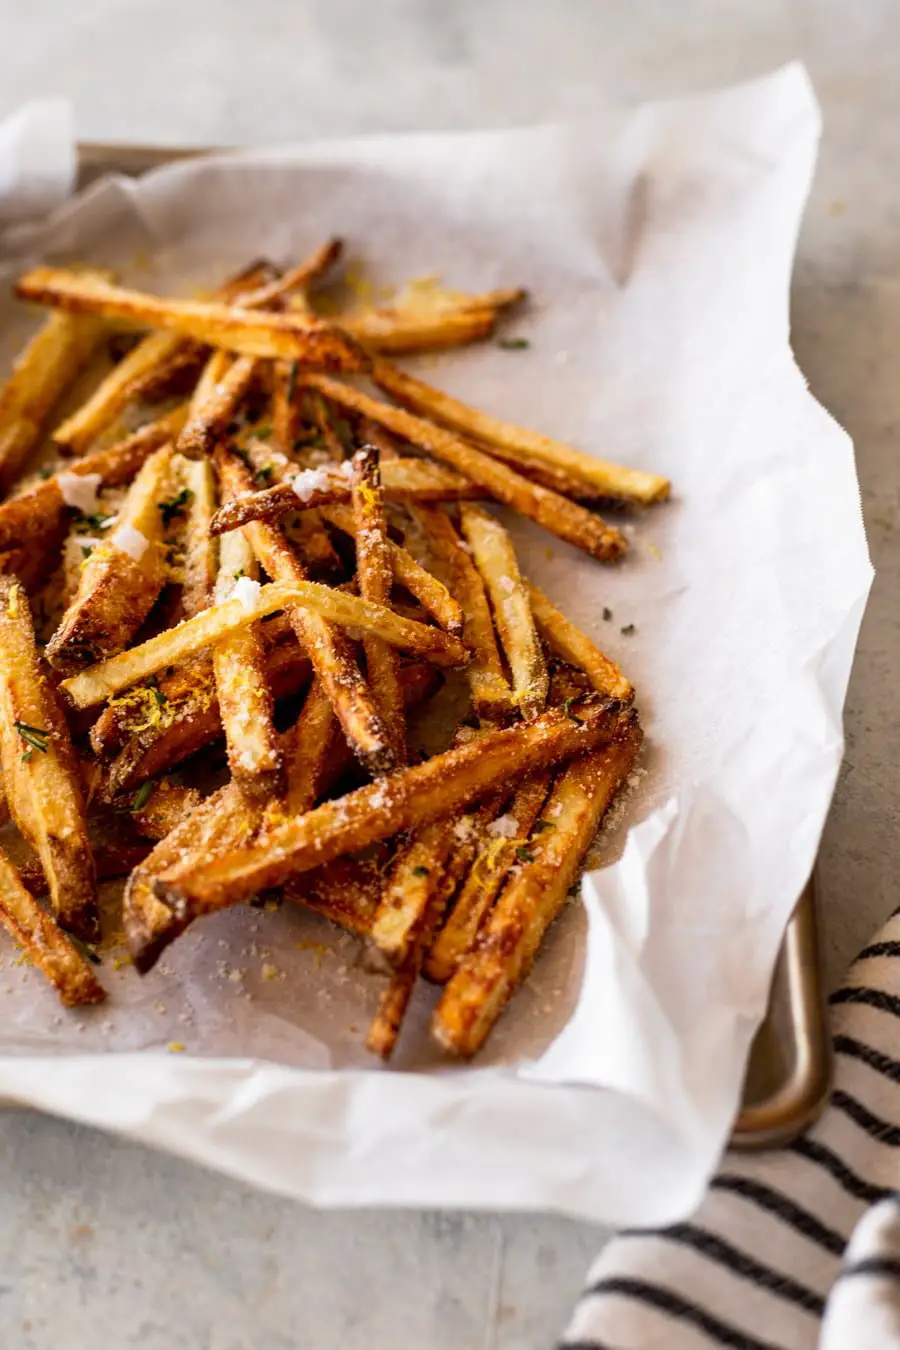 How to Make Crispy French Fries in the Air Fryer